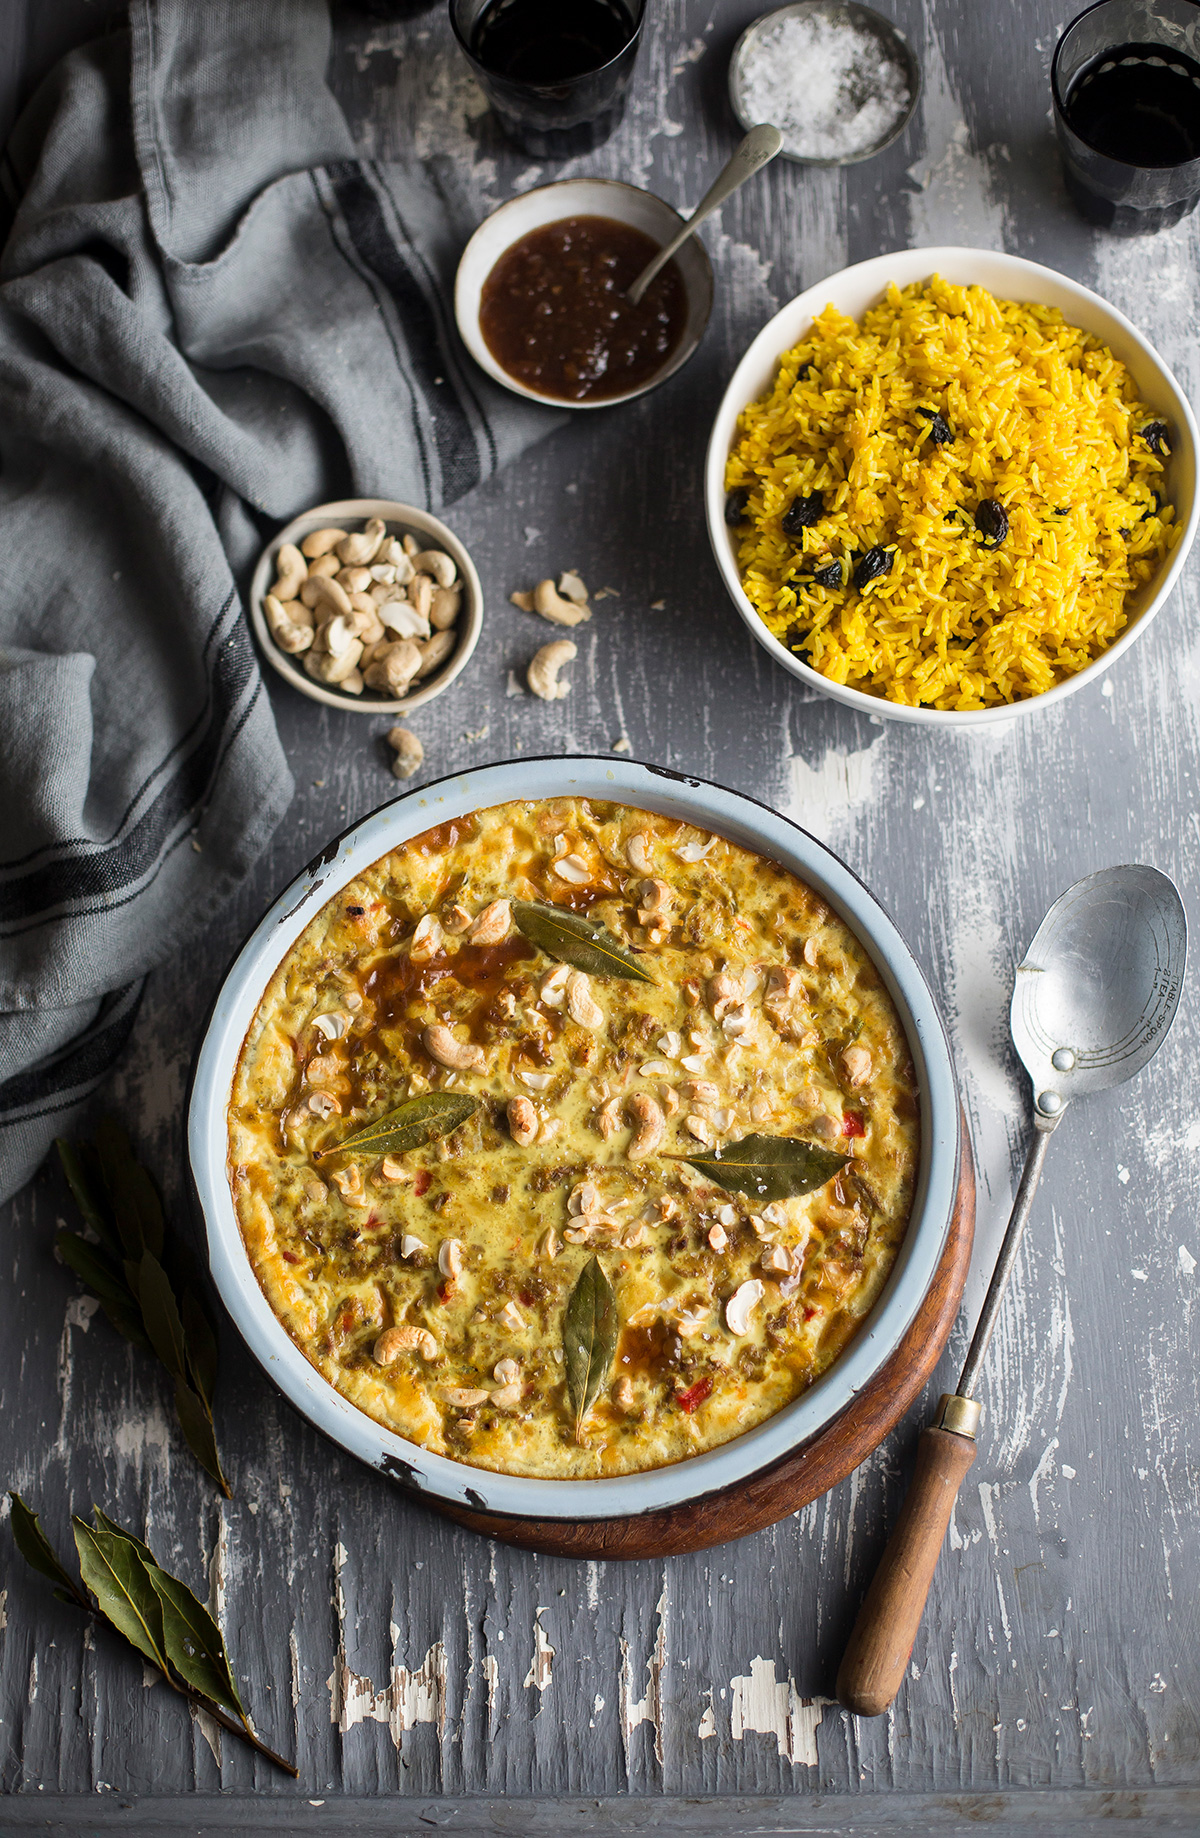 South African bobotie with fragrant yellow rice